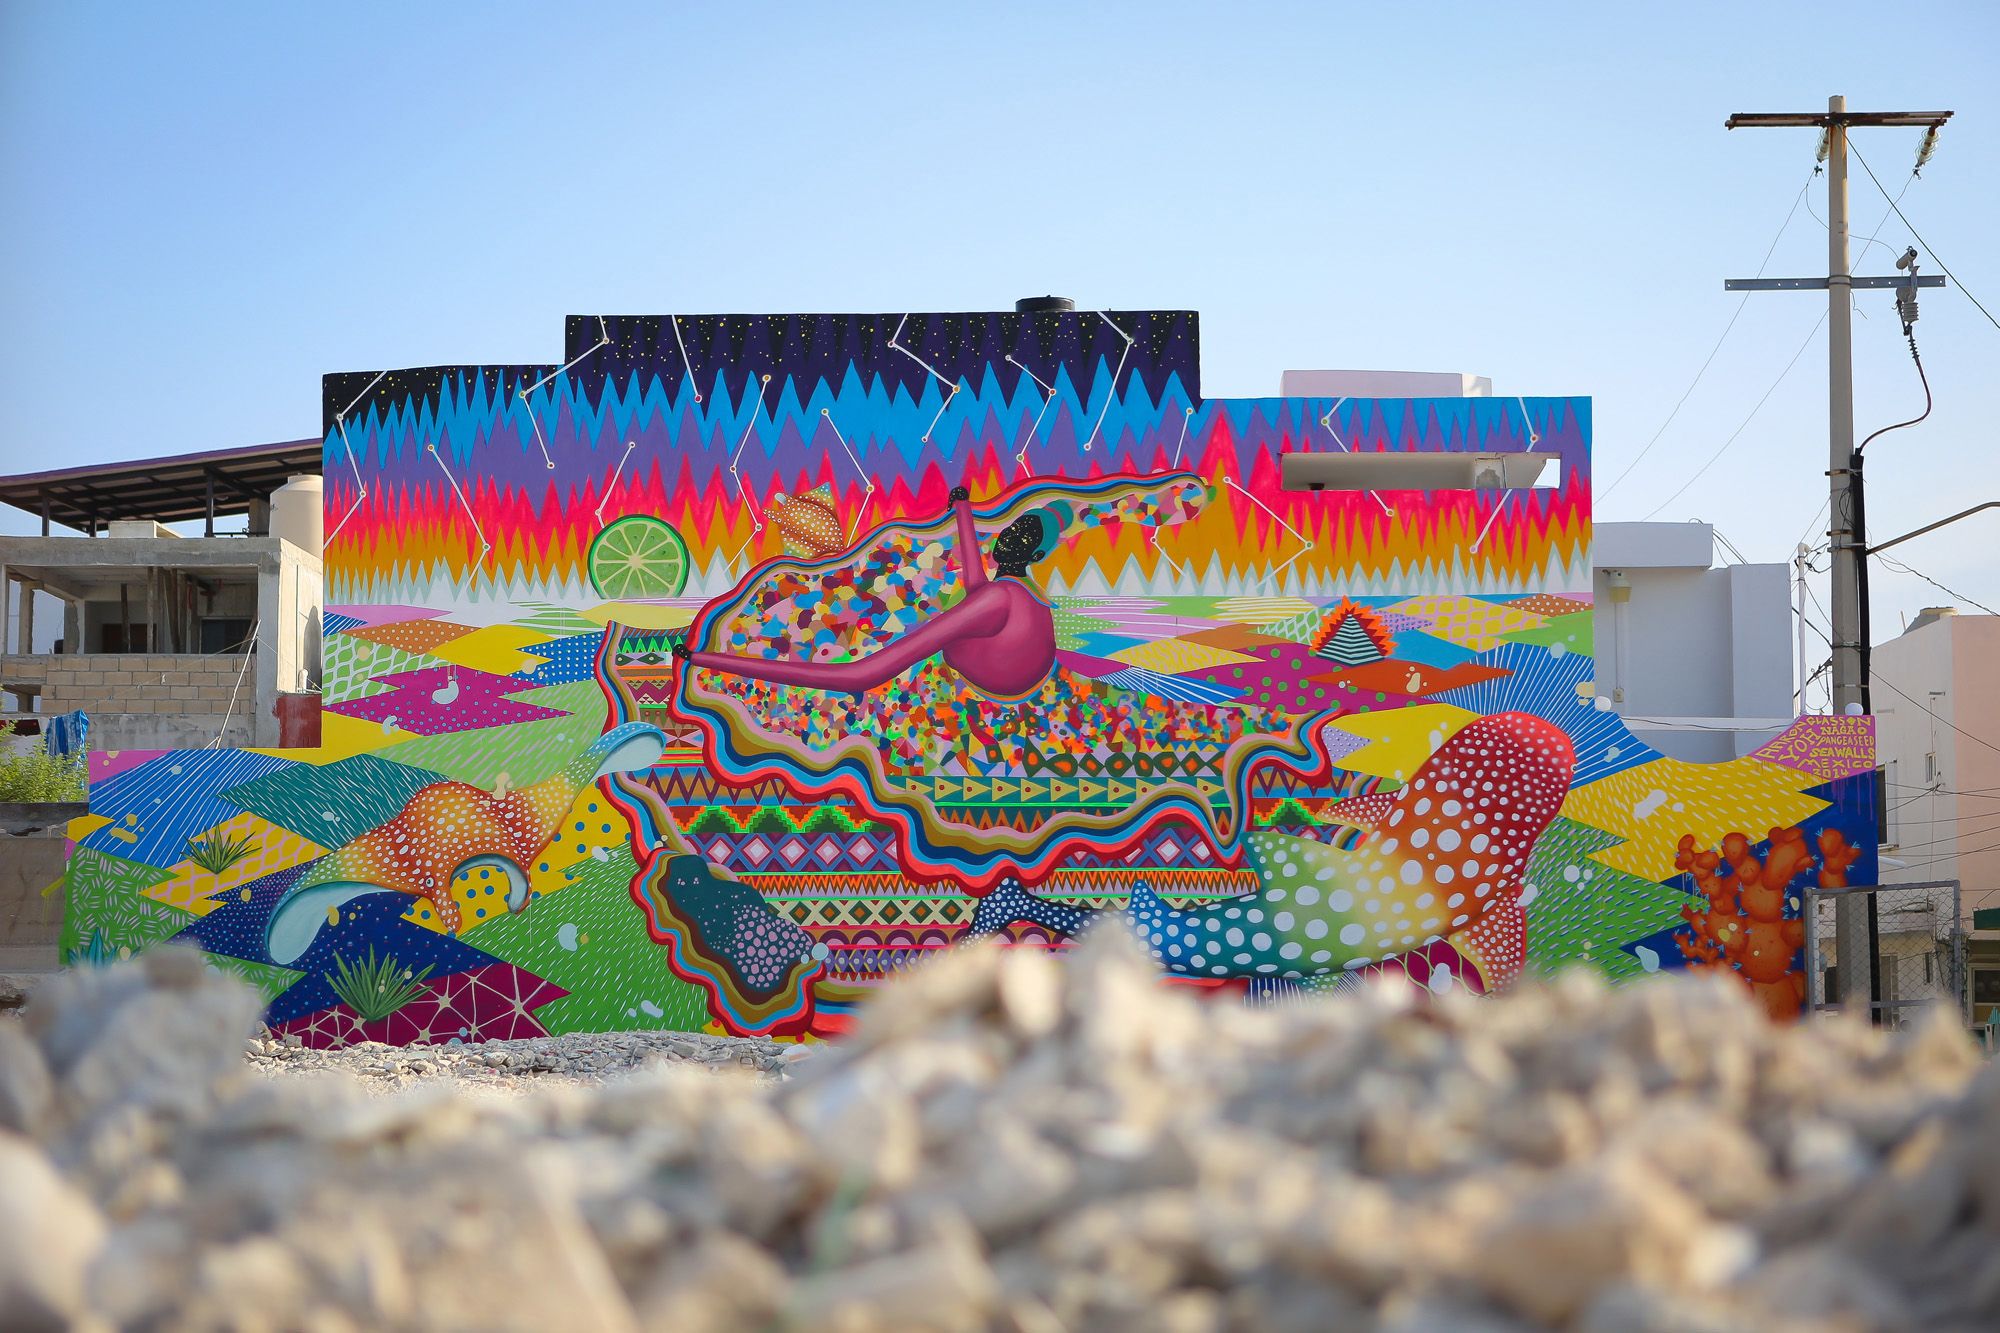 Margarita mural in Isla Mujeres, Mexico, by Yoh Nagao and Aaron Glasson